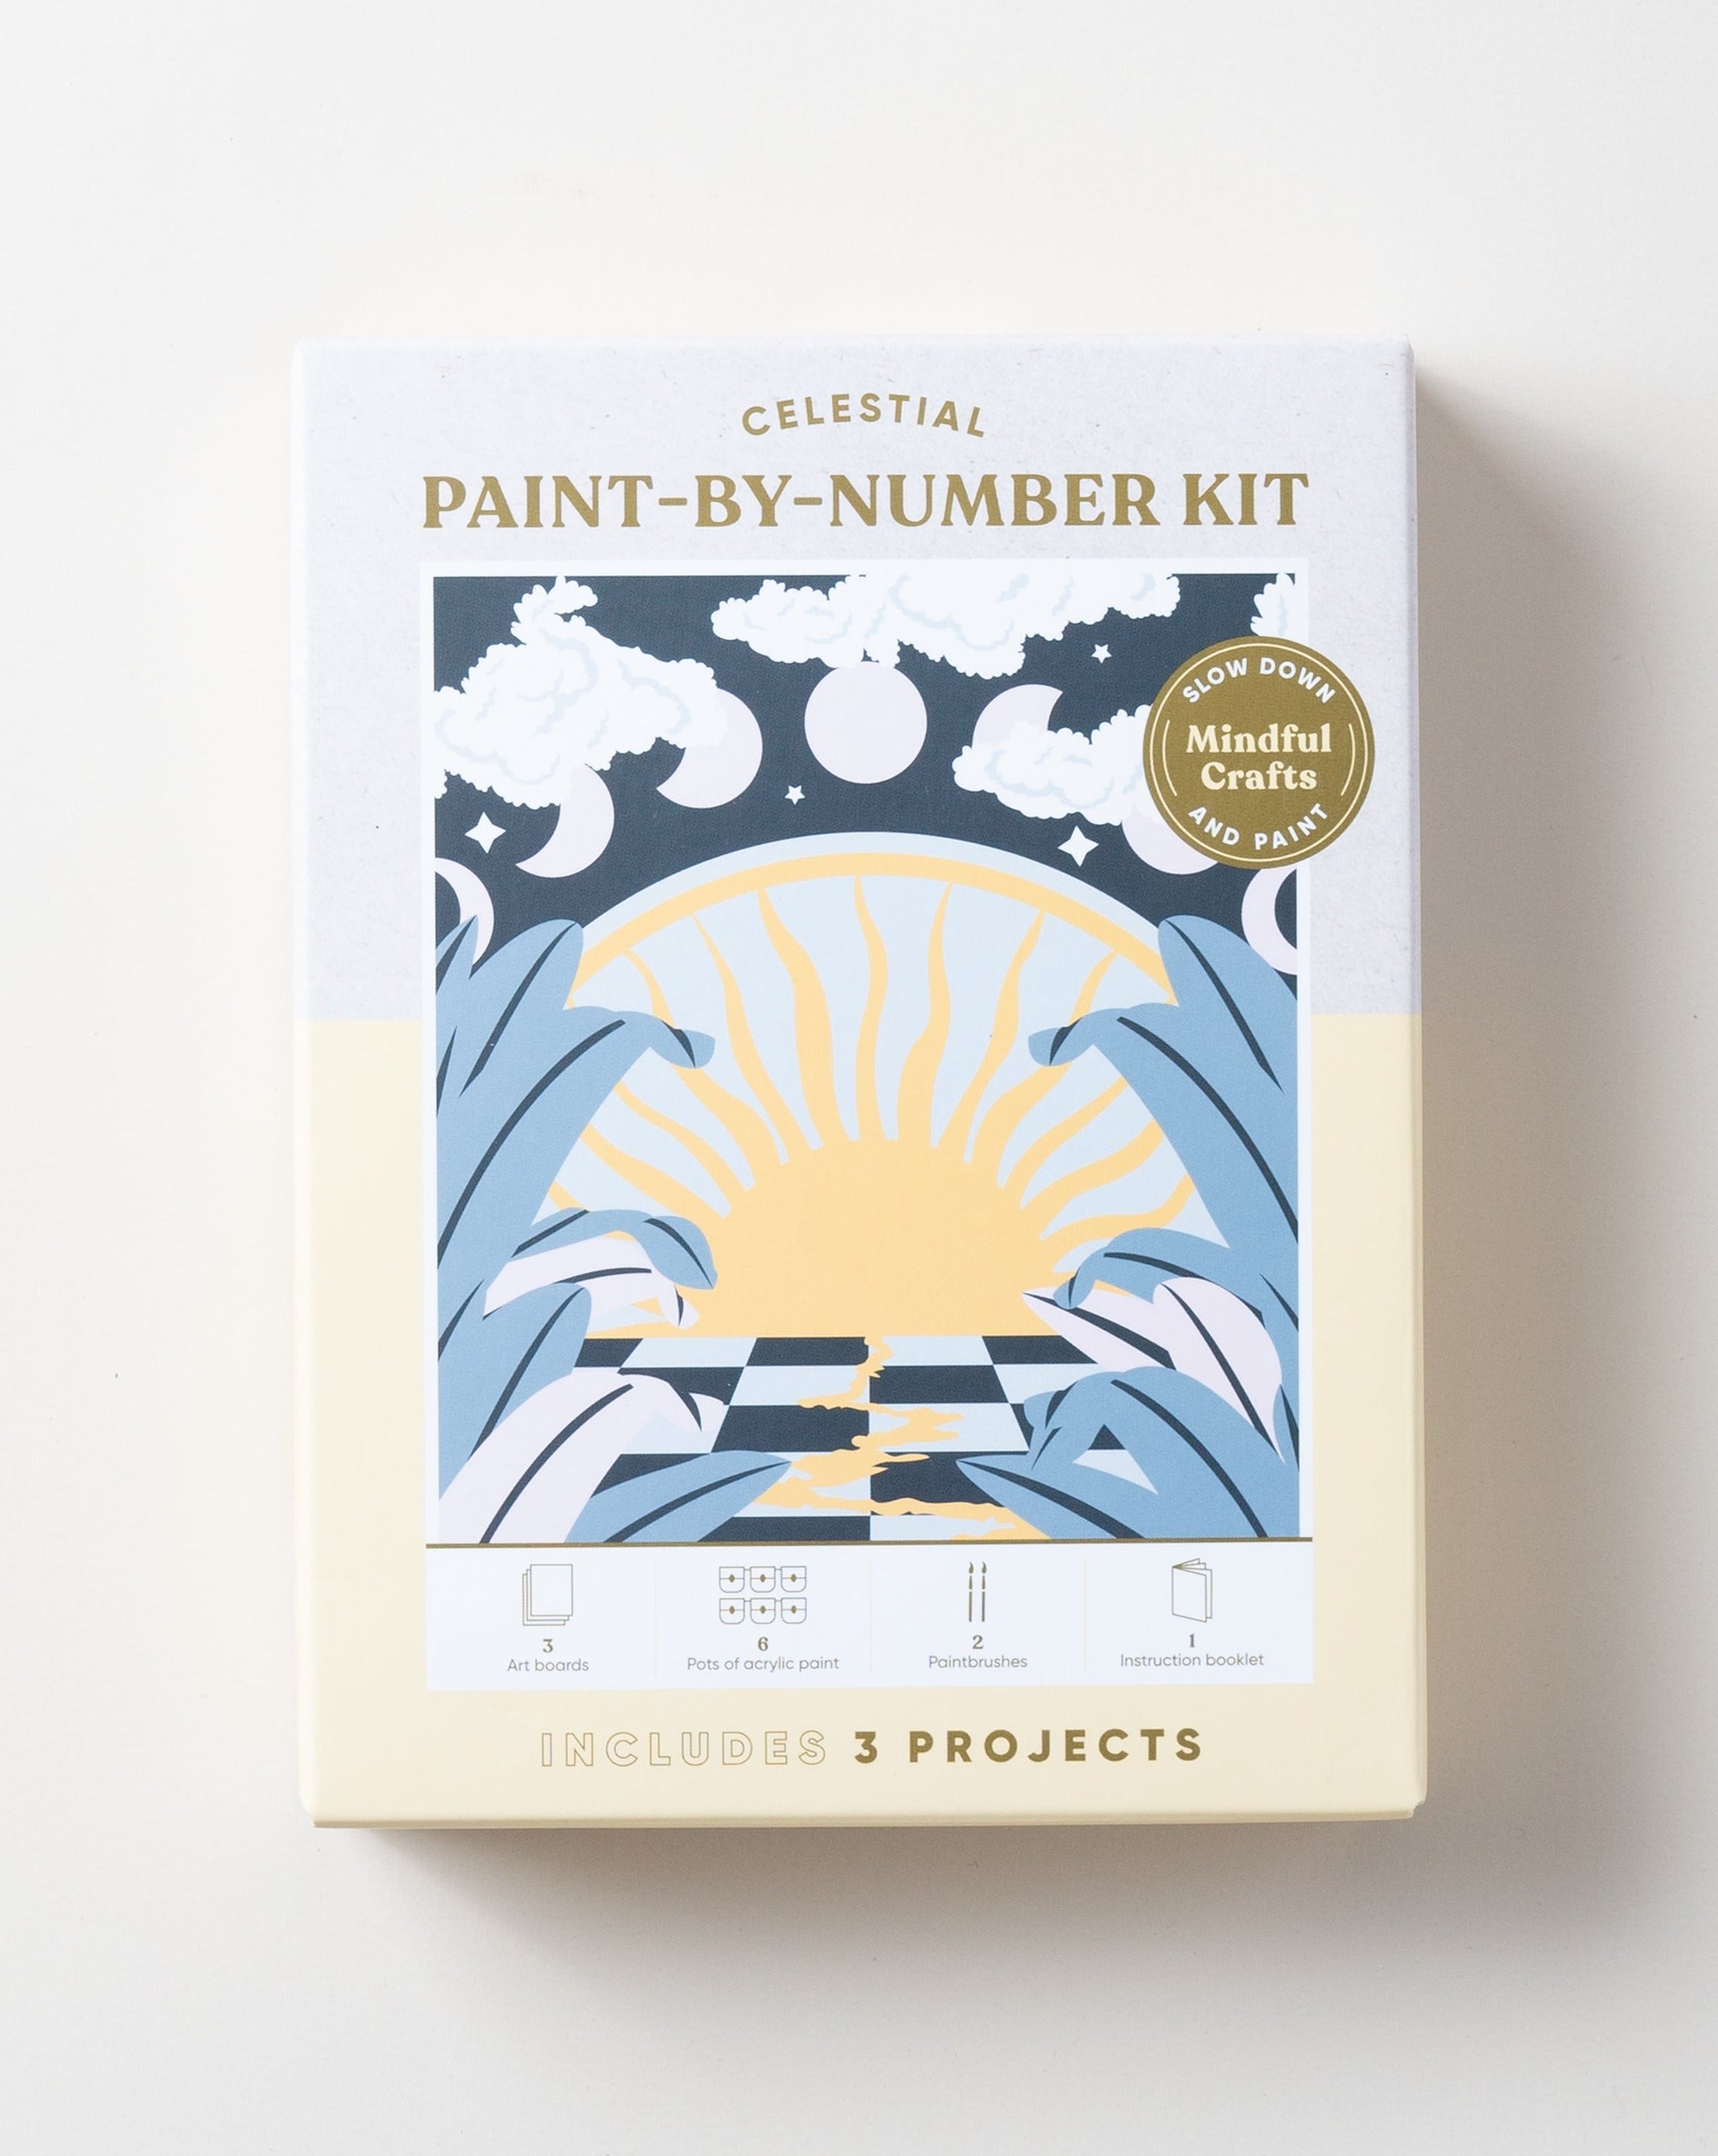 Mindful Crafts/Celestial Paint-by-Number Kit